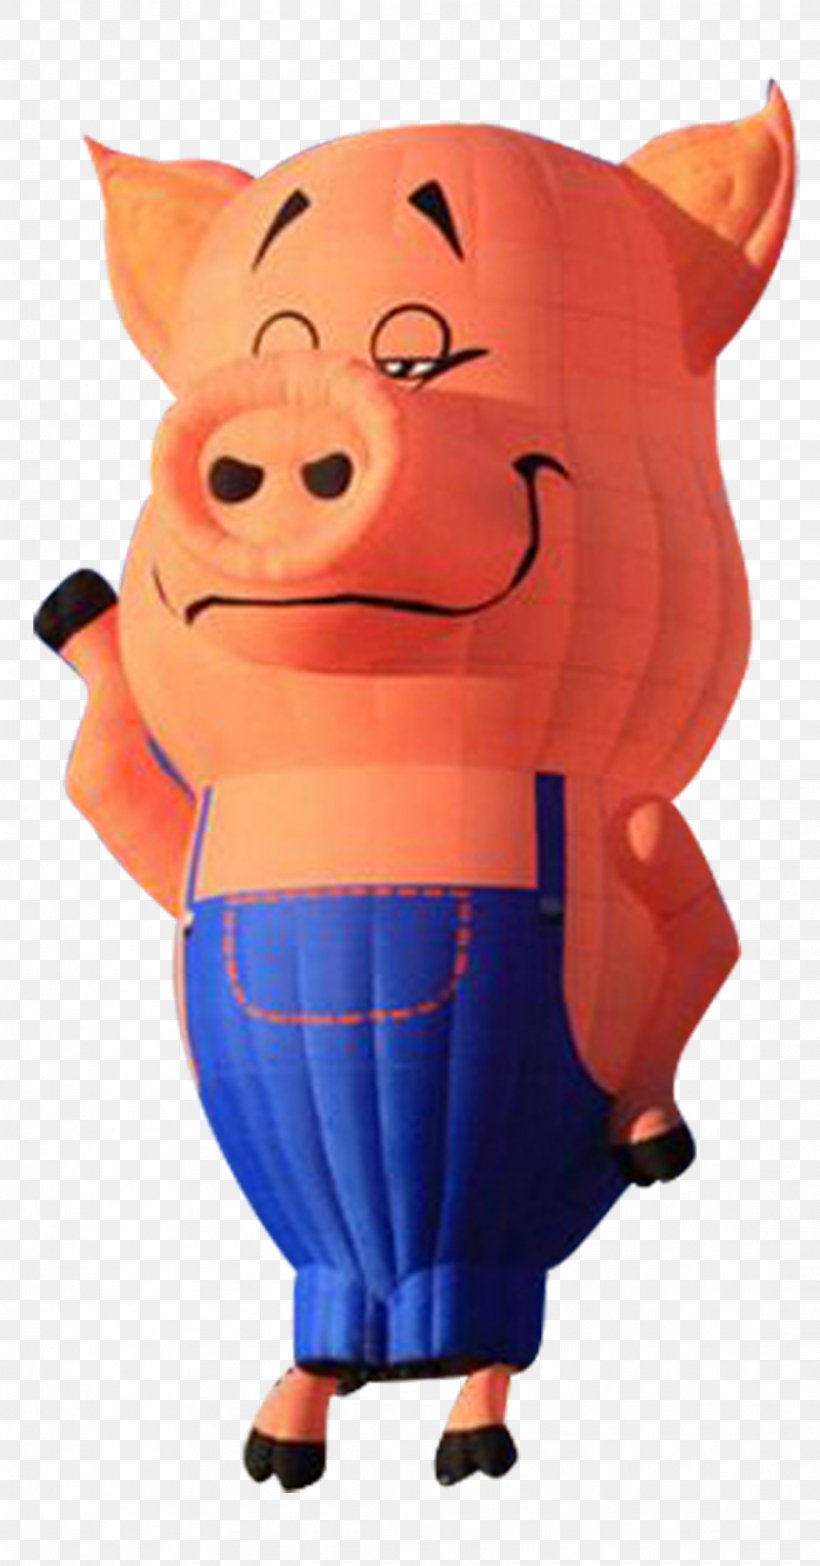 Domestic Pig Balloon Designer, PNG, 1111x2122px, Domestic Pig, Balloon, Balloon Light, Balloon Modelling, Cartoon Download Free